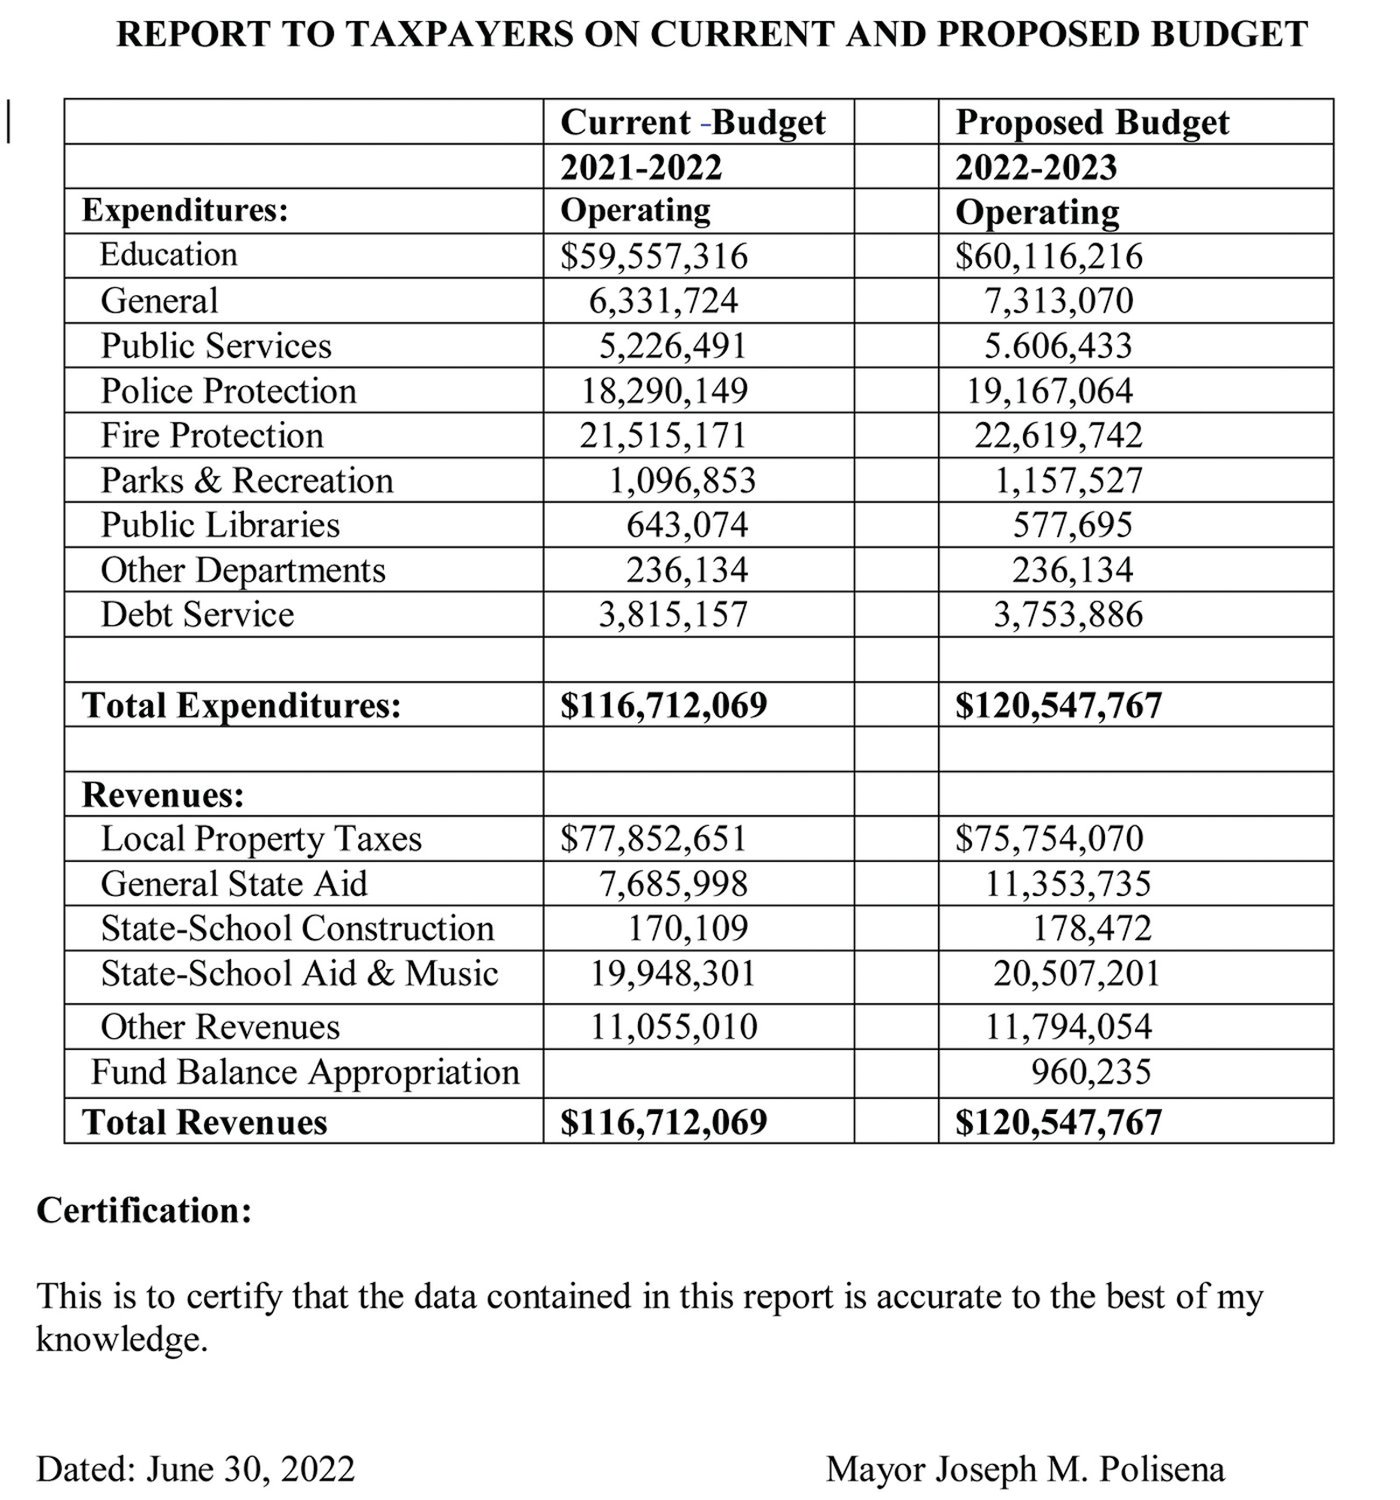 Last year, a slight decrease in taxes was announced on June 30, 2022. Town Councilman Robert Civetti says the Town Charter requires a budget presentation by April 1. Last year, the council unanimously adopted $120,547,767 town budget. Civetti wants more budget discussion held in public.